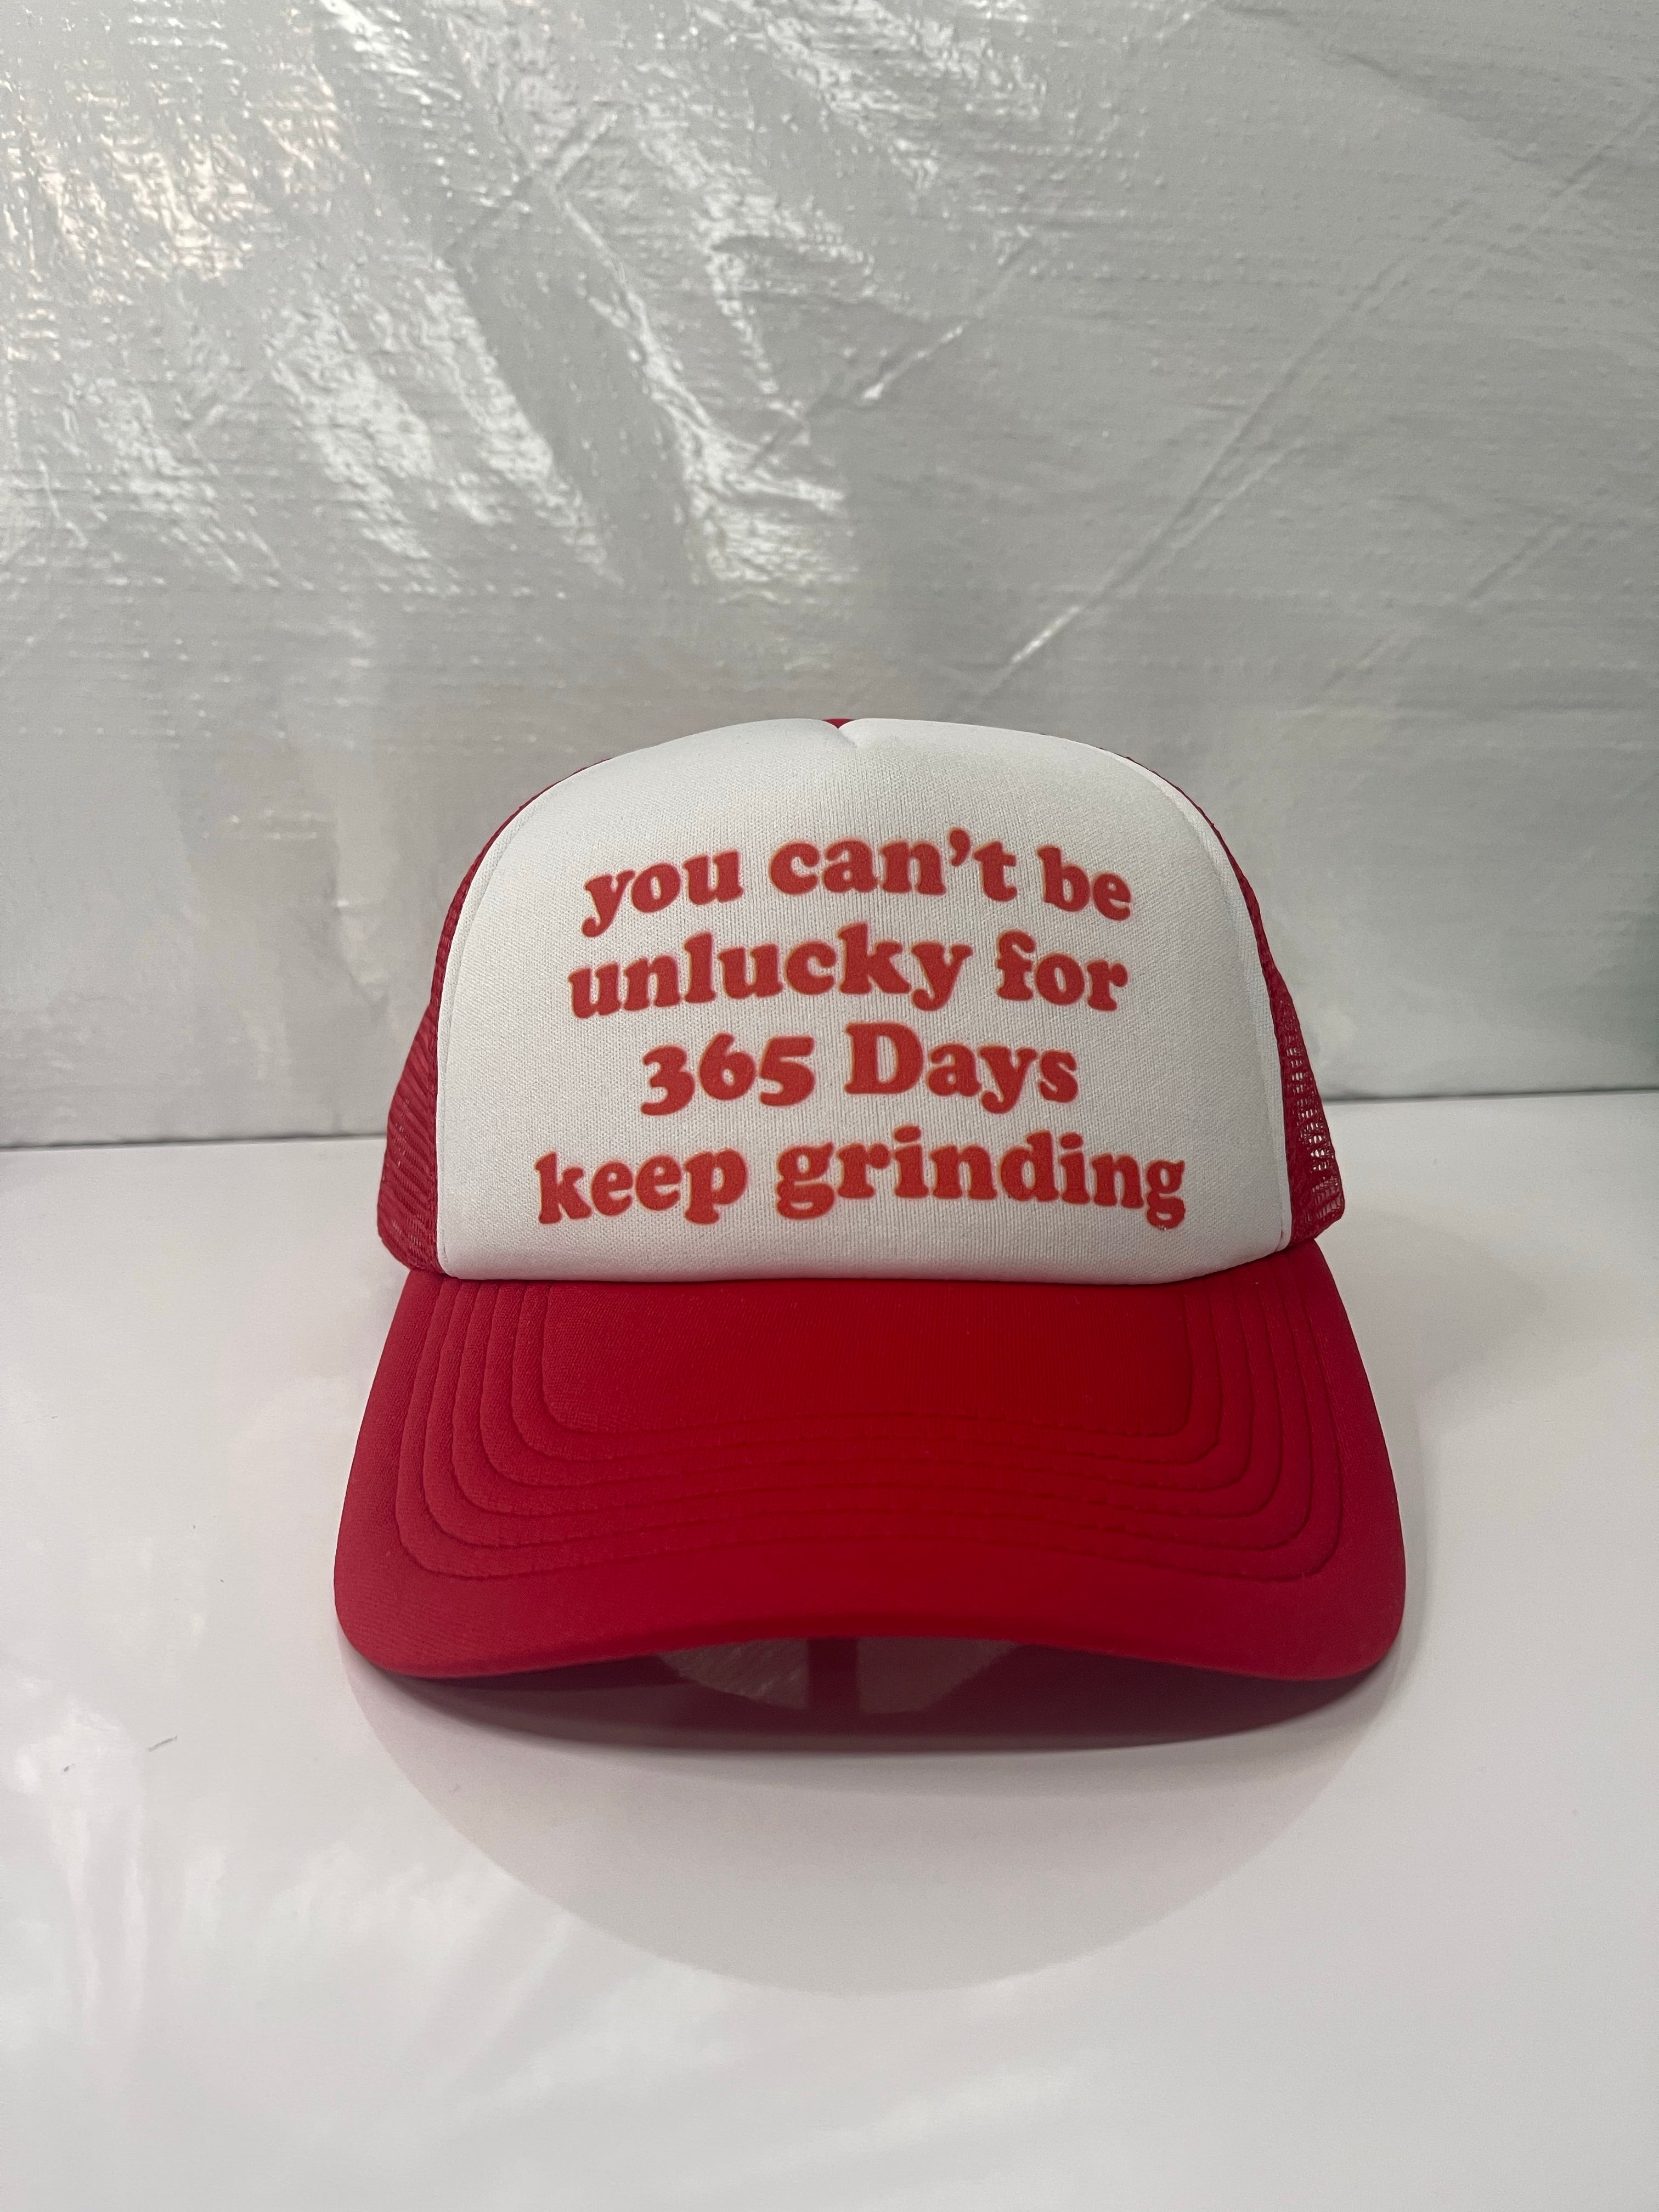 You Can’t be unlucky for 365 Days – TruckerHatme